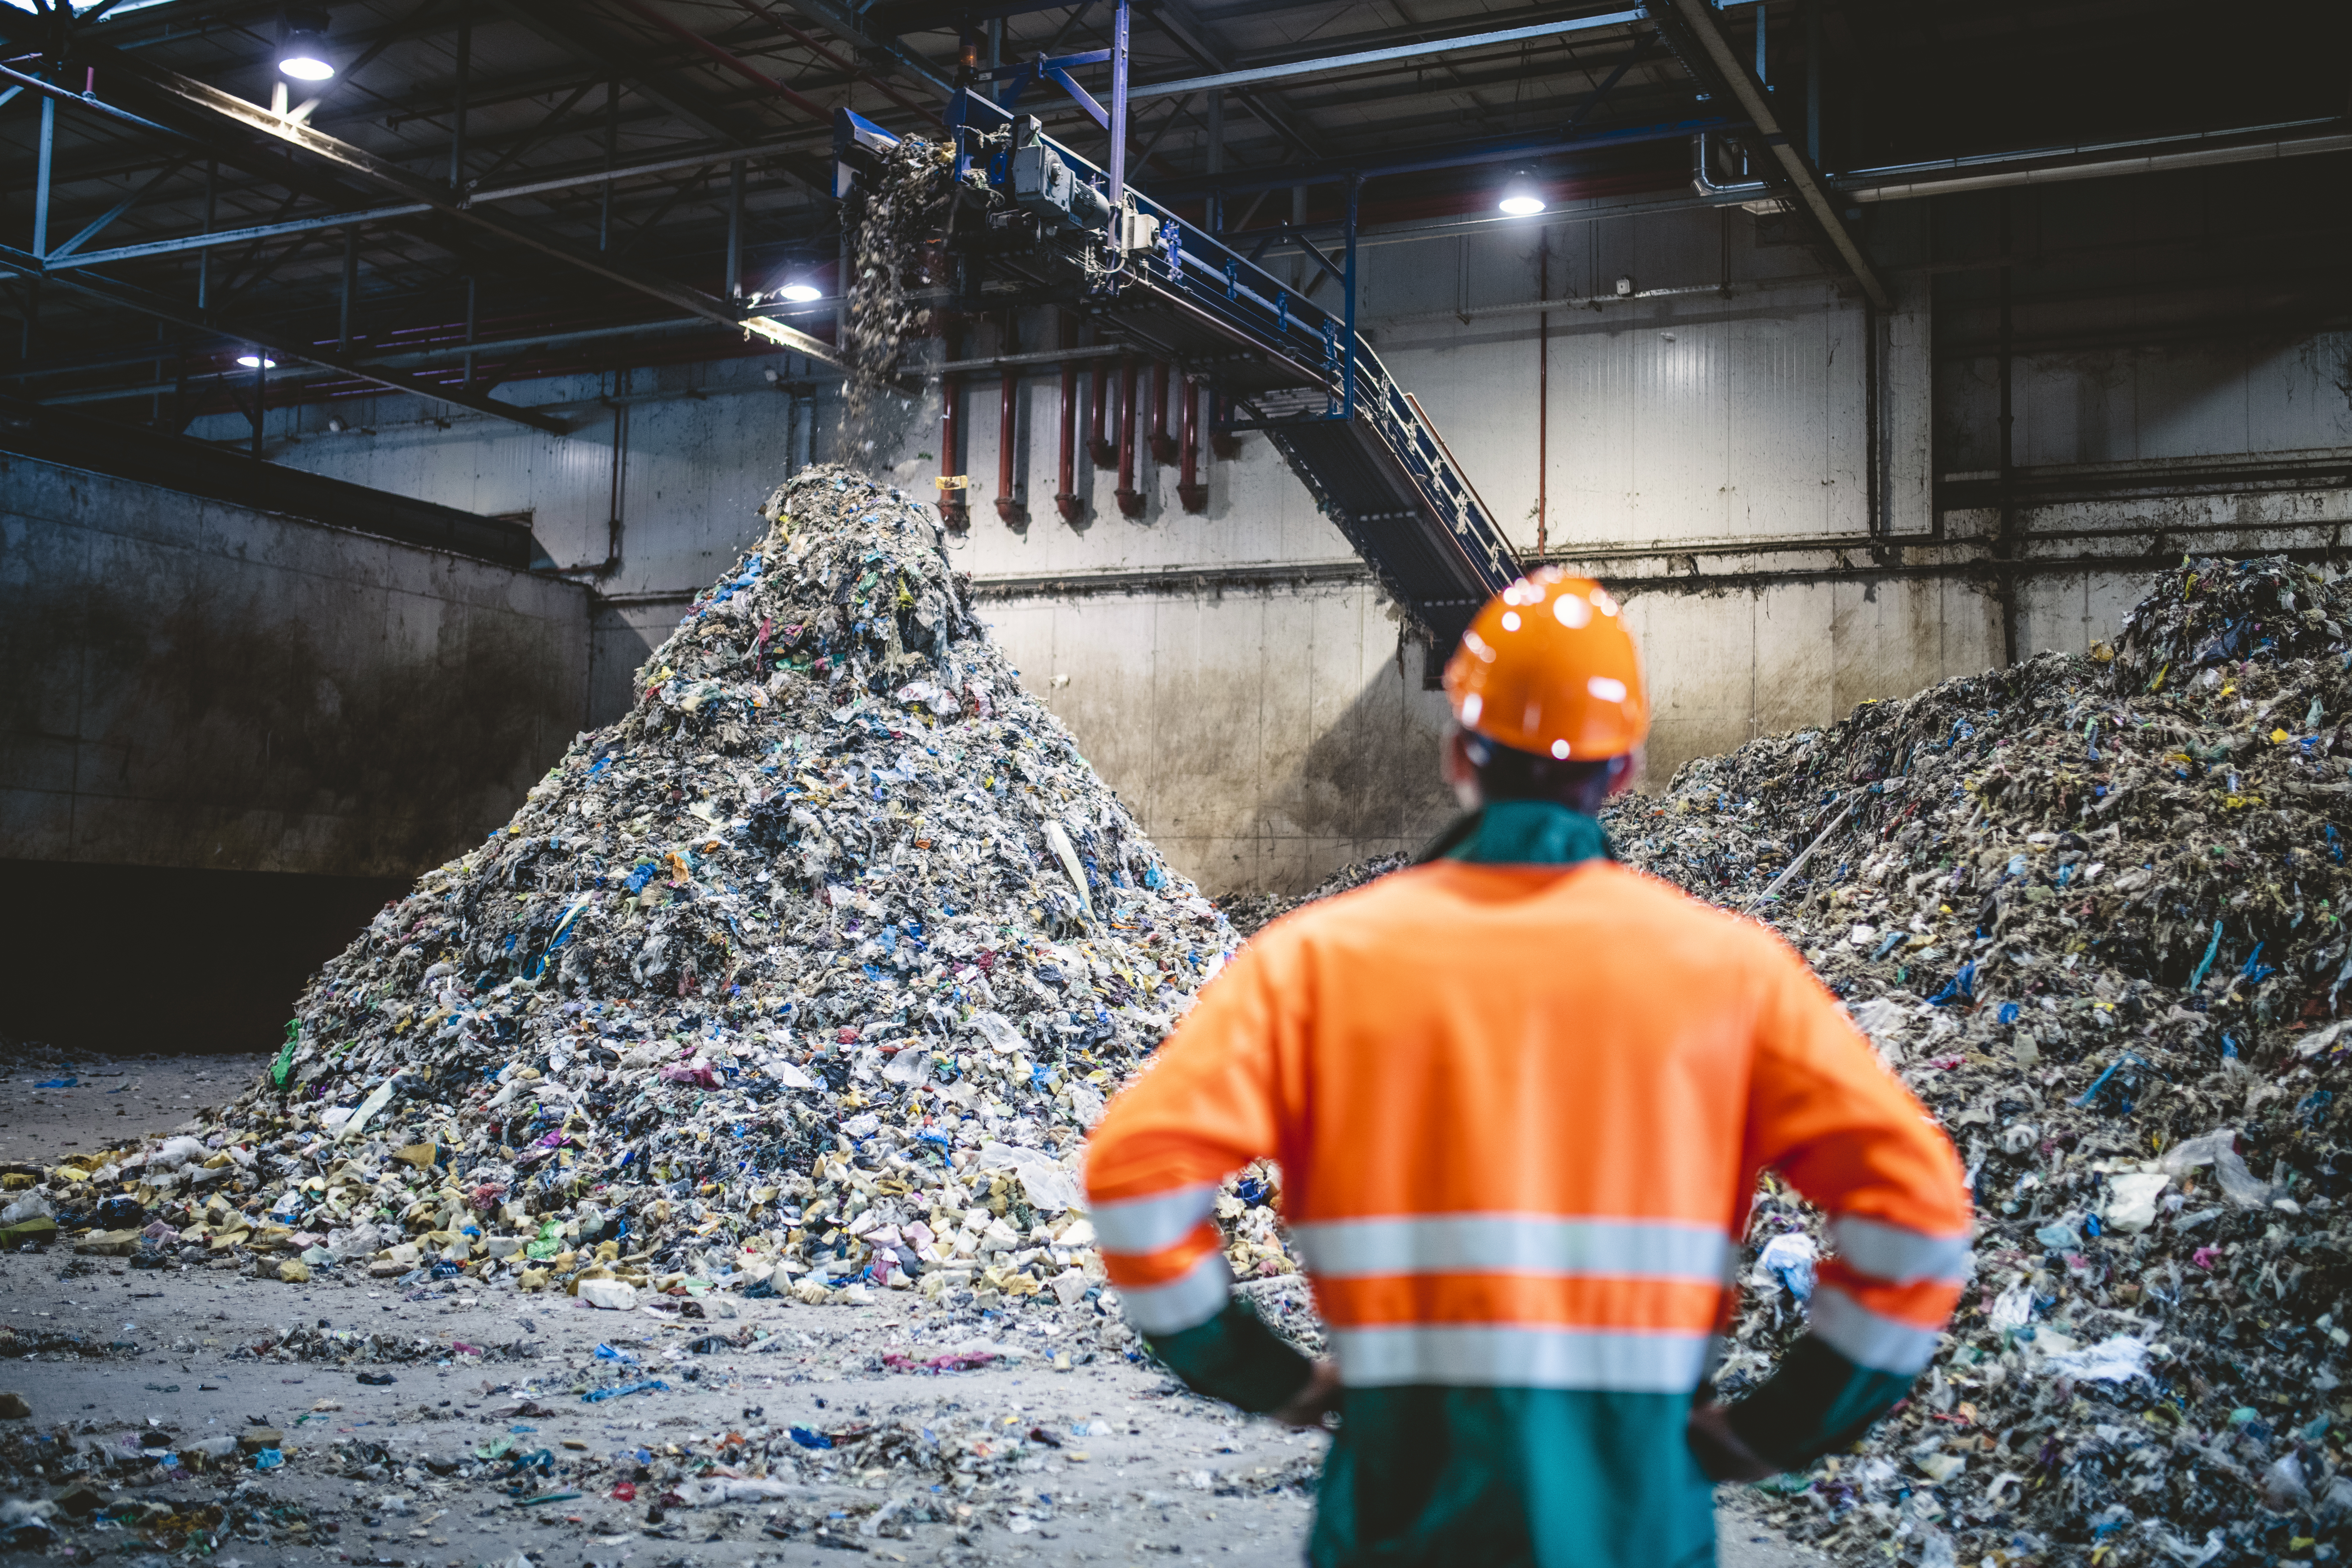 The Global Mechanical Plastics Recycling Industry 2023